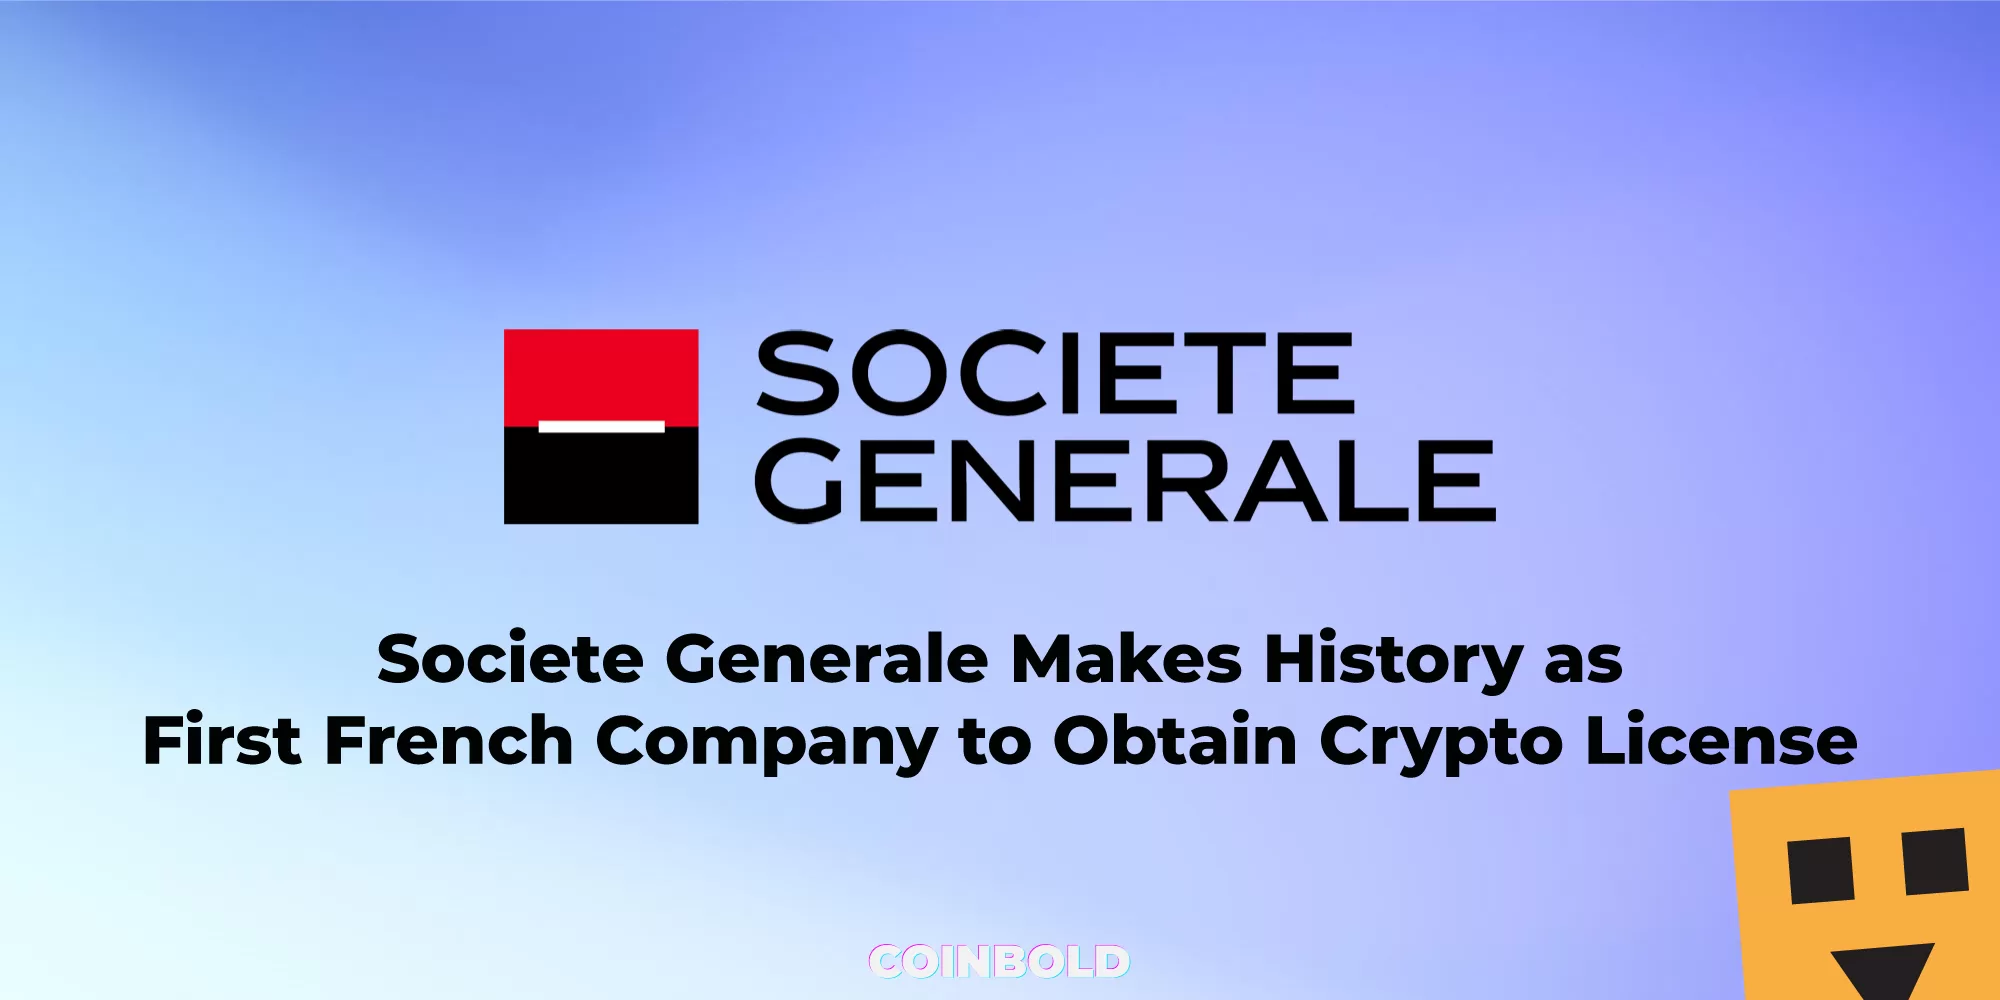 Societe Generale Makes History as First French Company to Obtain Crypto License